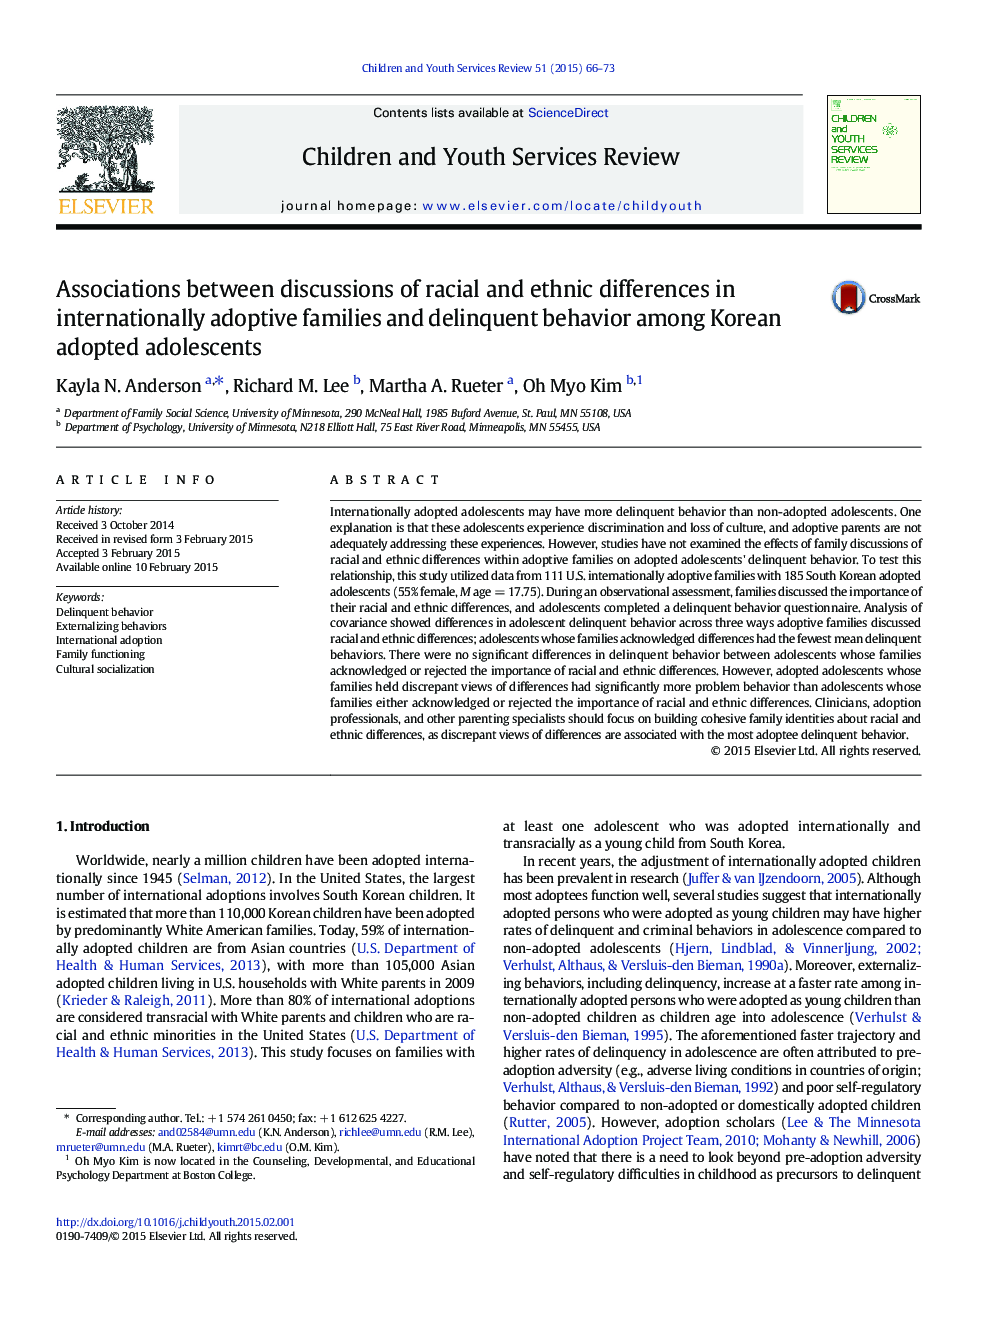 Associations between discussions of racial and ethnic differences in internationally adoptive families and delinquent behavior among Korean adopted adolescents